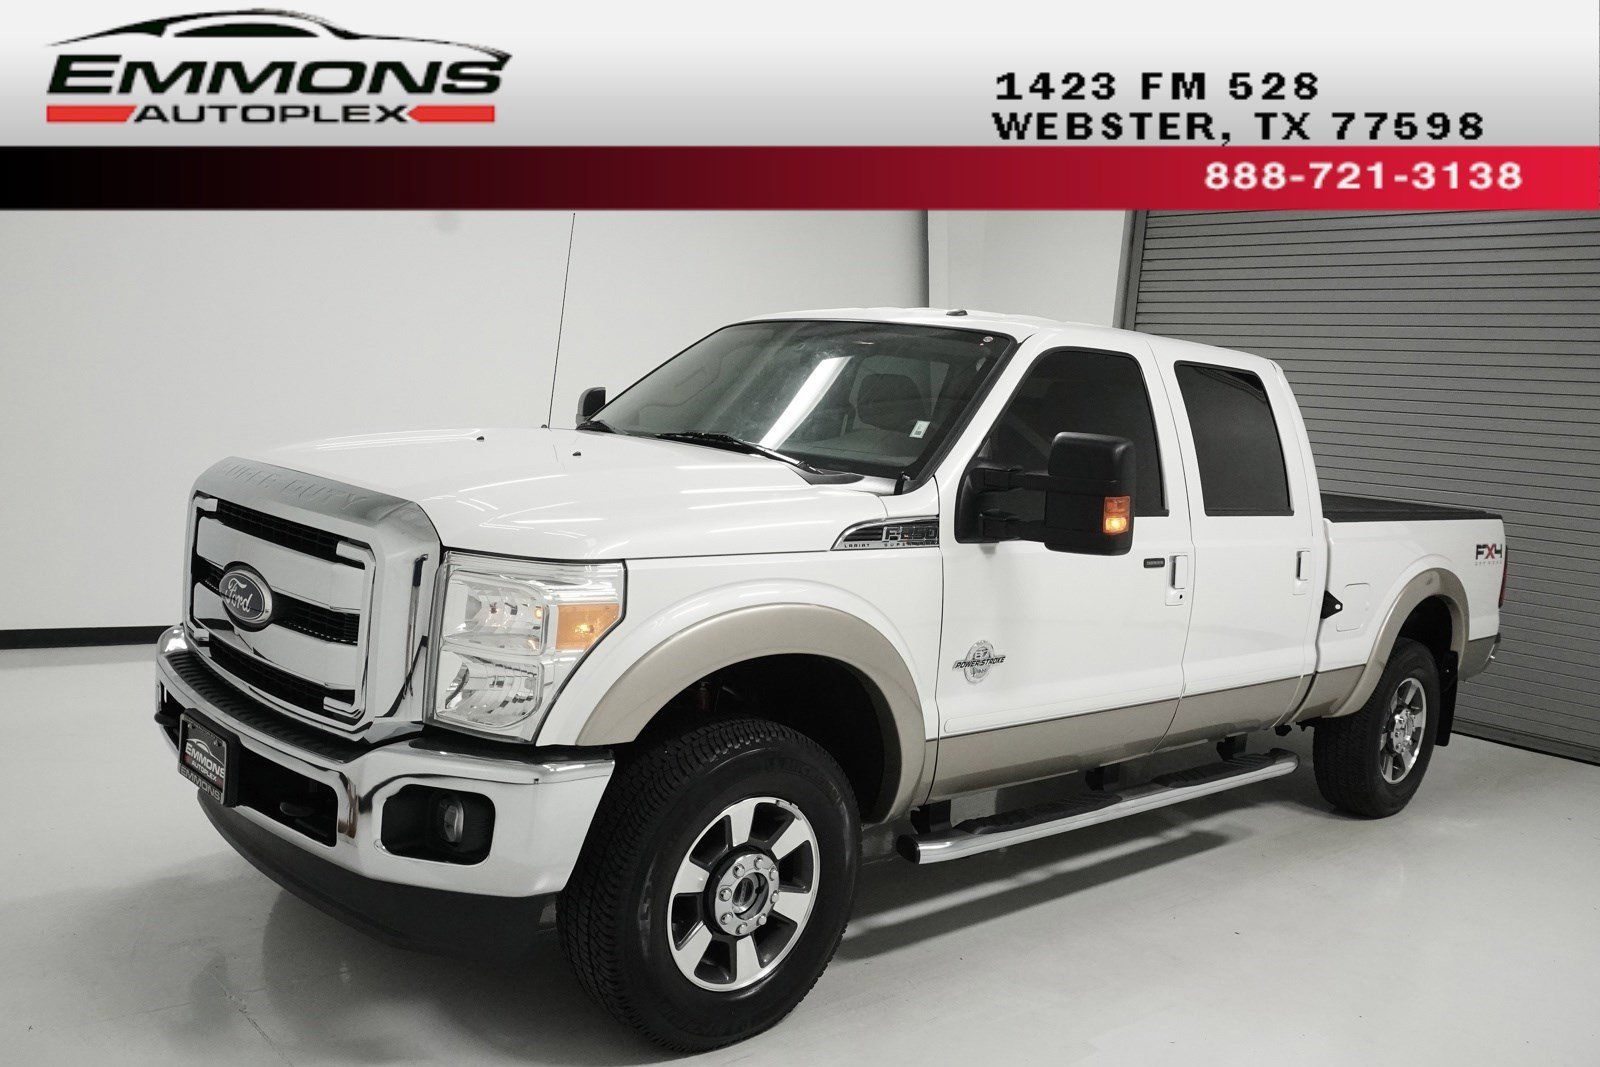 Used 2011 Ford Super Duty F-250